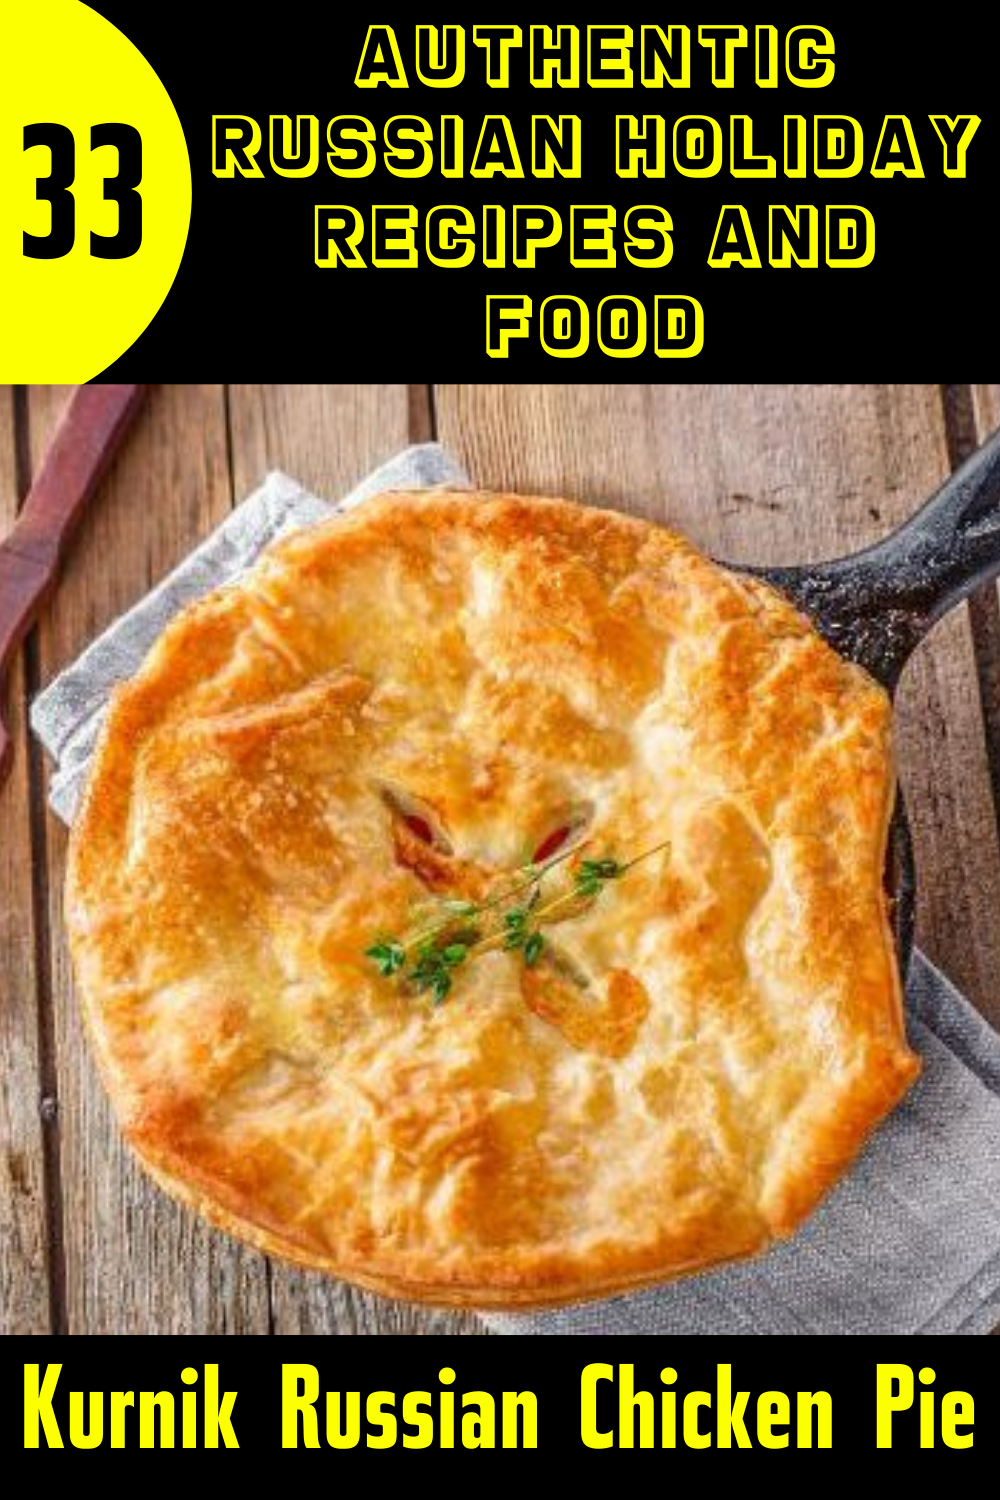 Authentic Russian Holiday Recipes and Food - Kurnik Russian Chicken Pie